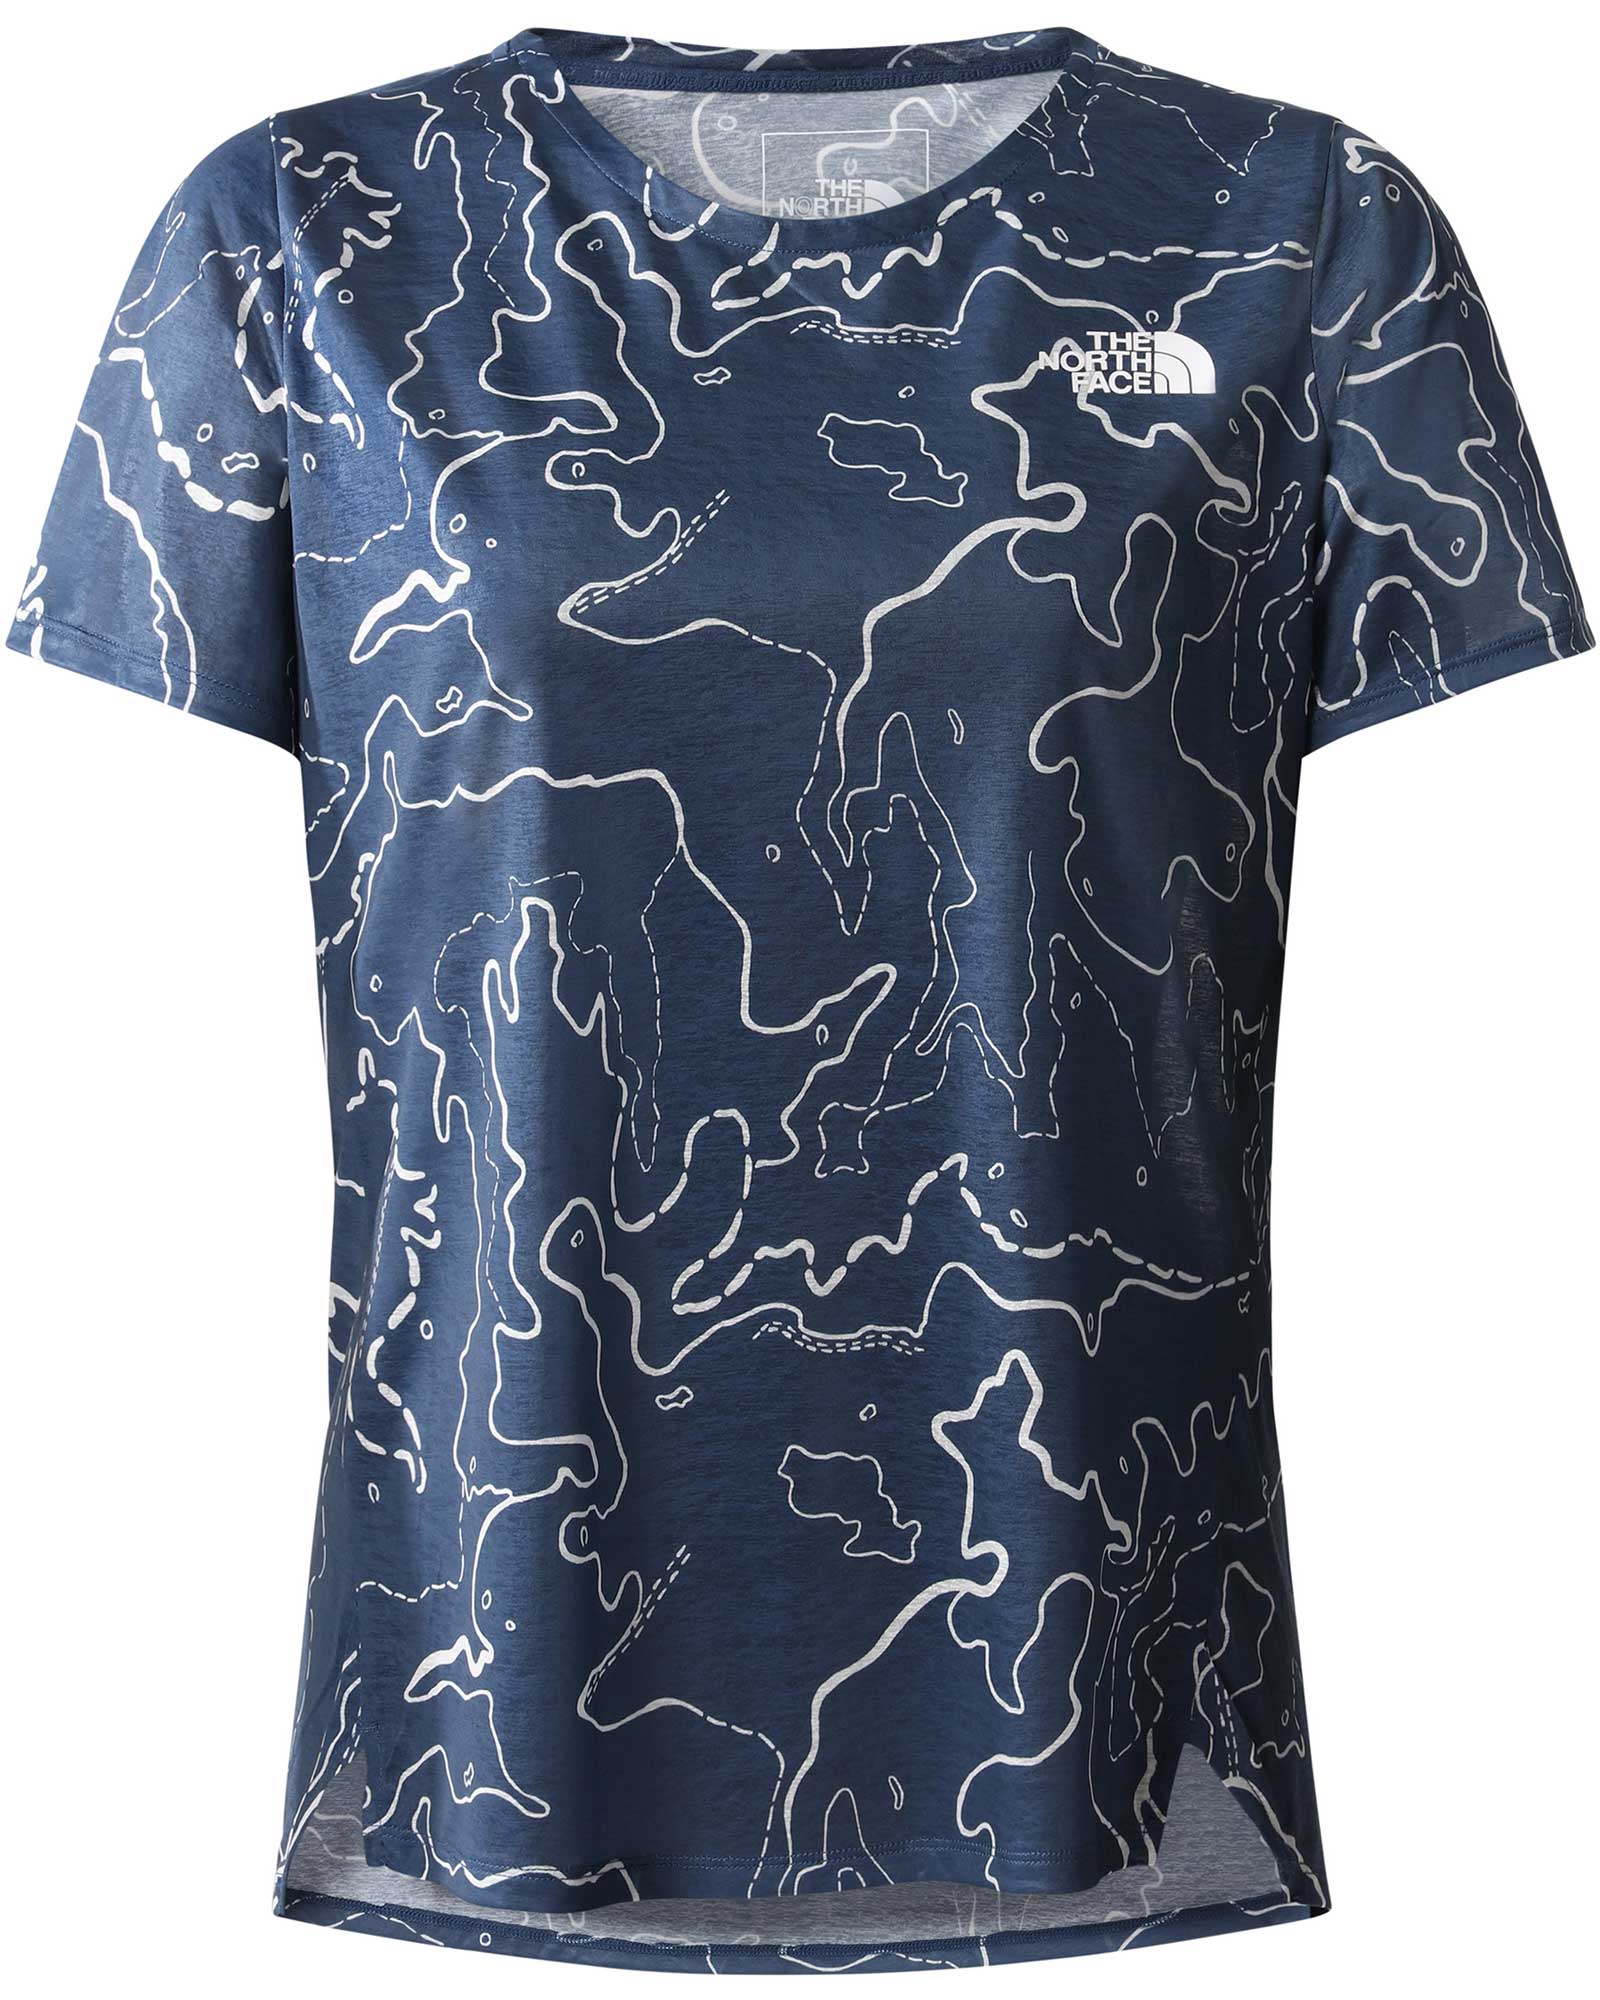 The North Face Simple Dome Women’s Shirt - Shady Blue Topo Print S